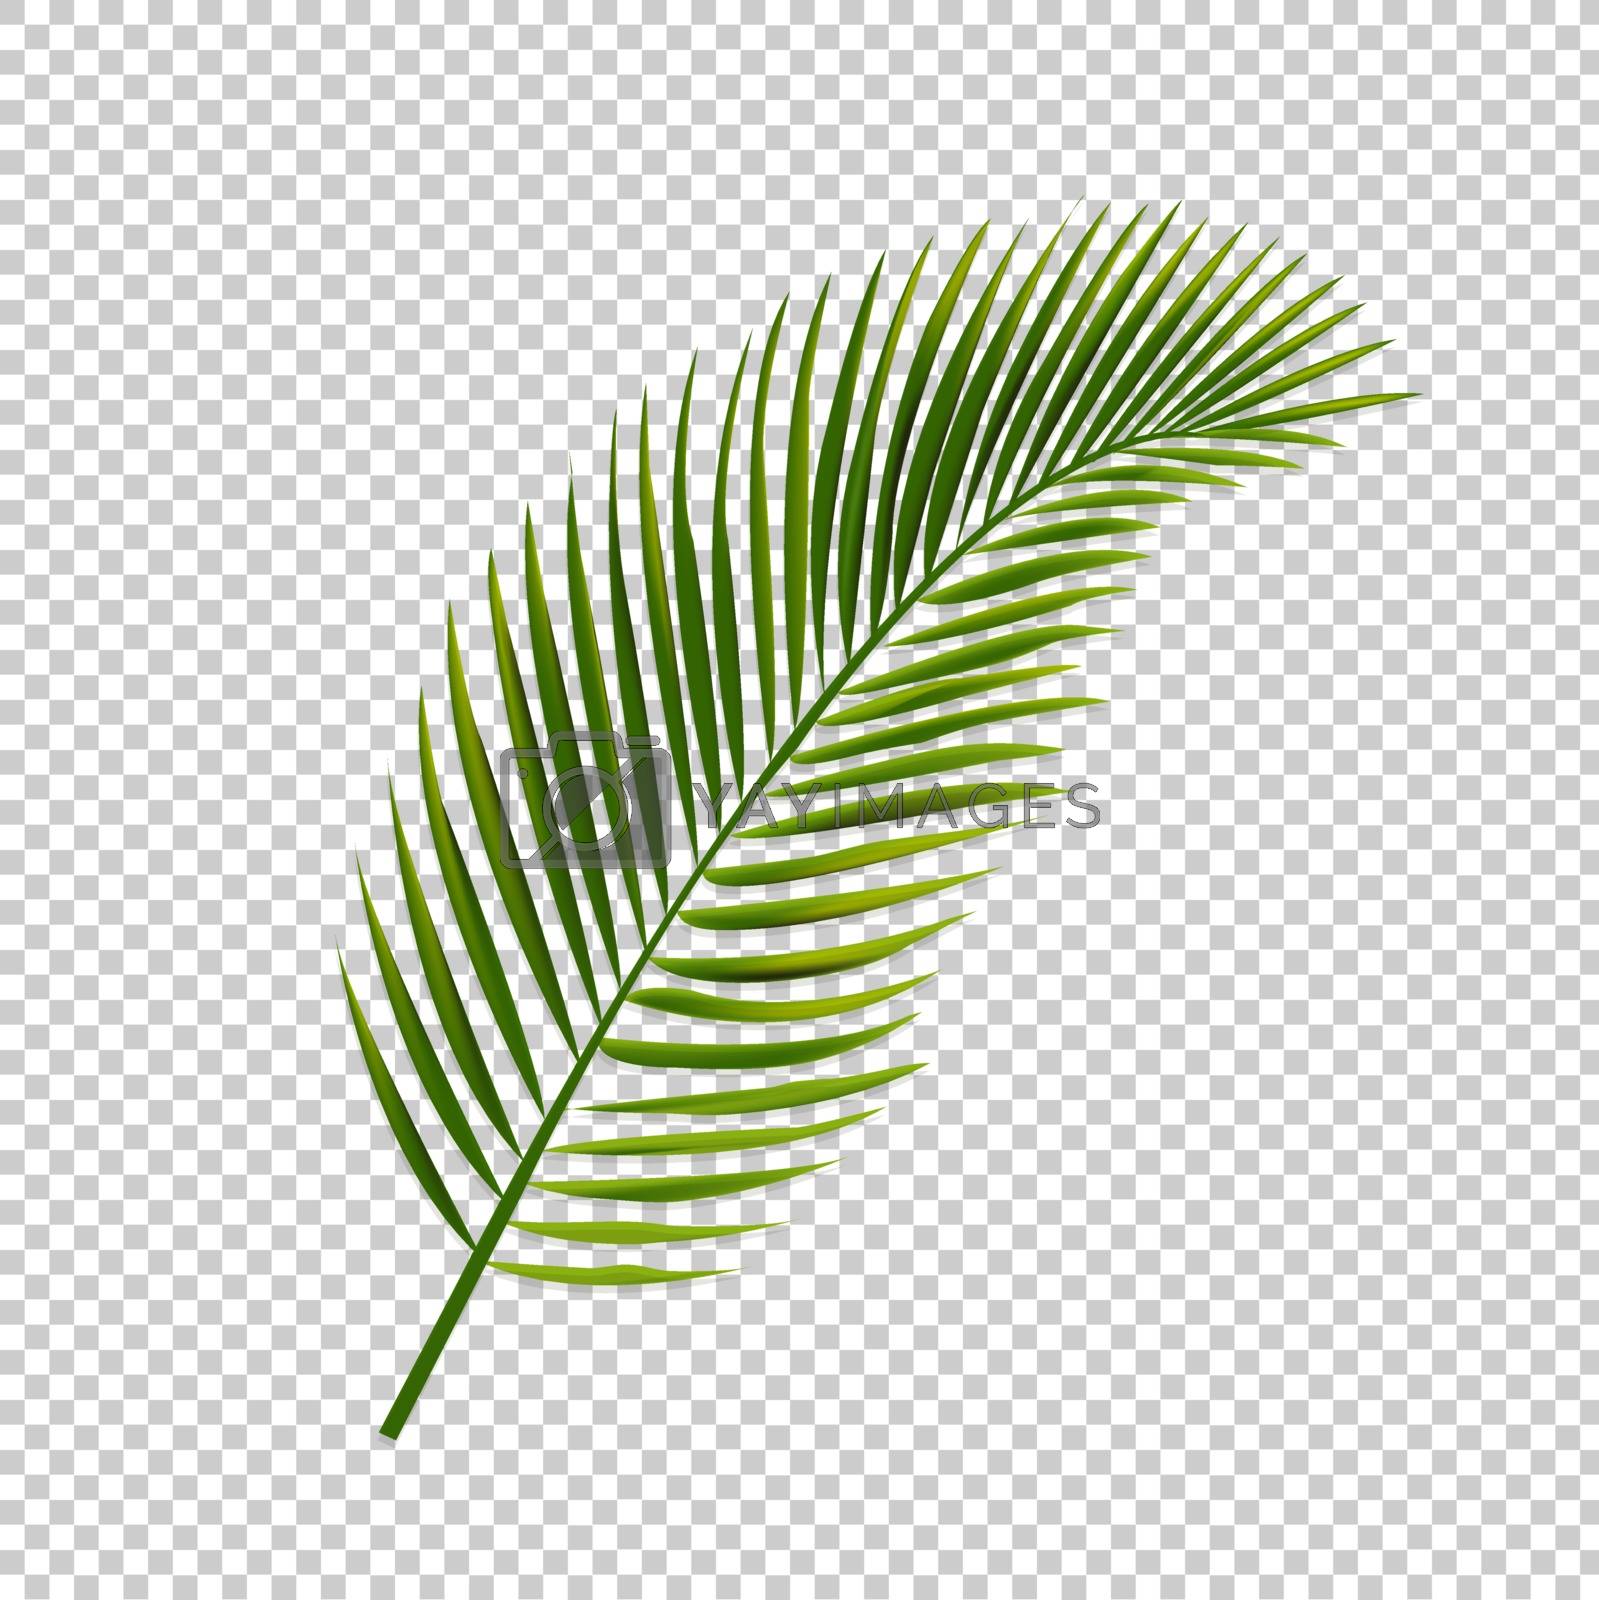 Royalty free image of Palm Leaf Isolated Transparent Background by barbaliss